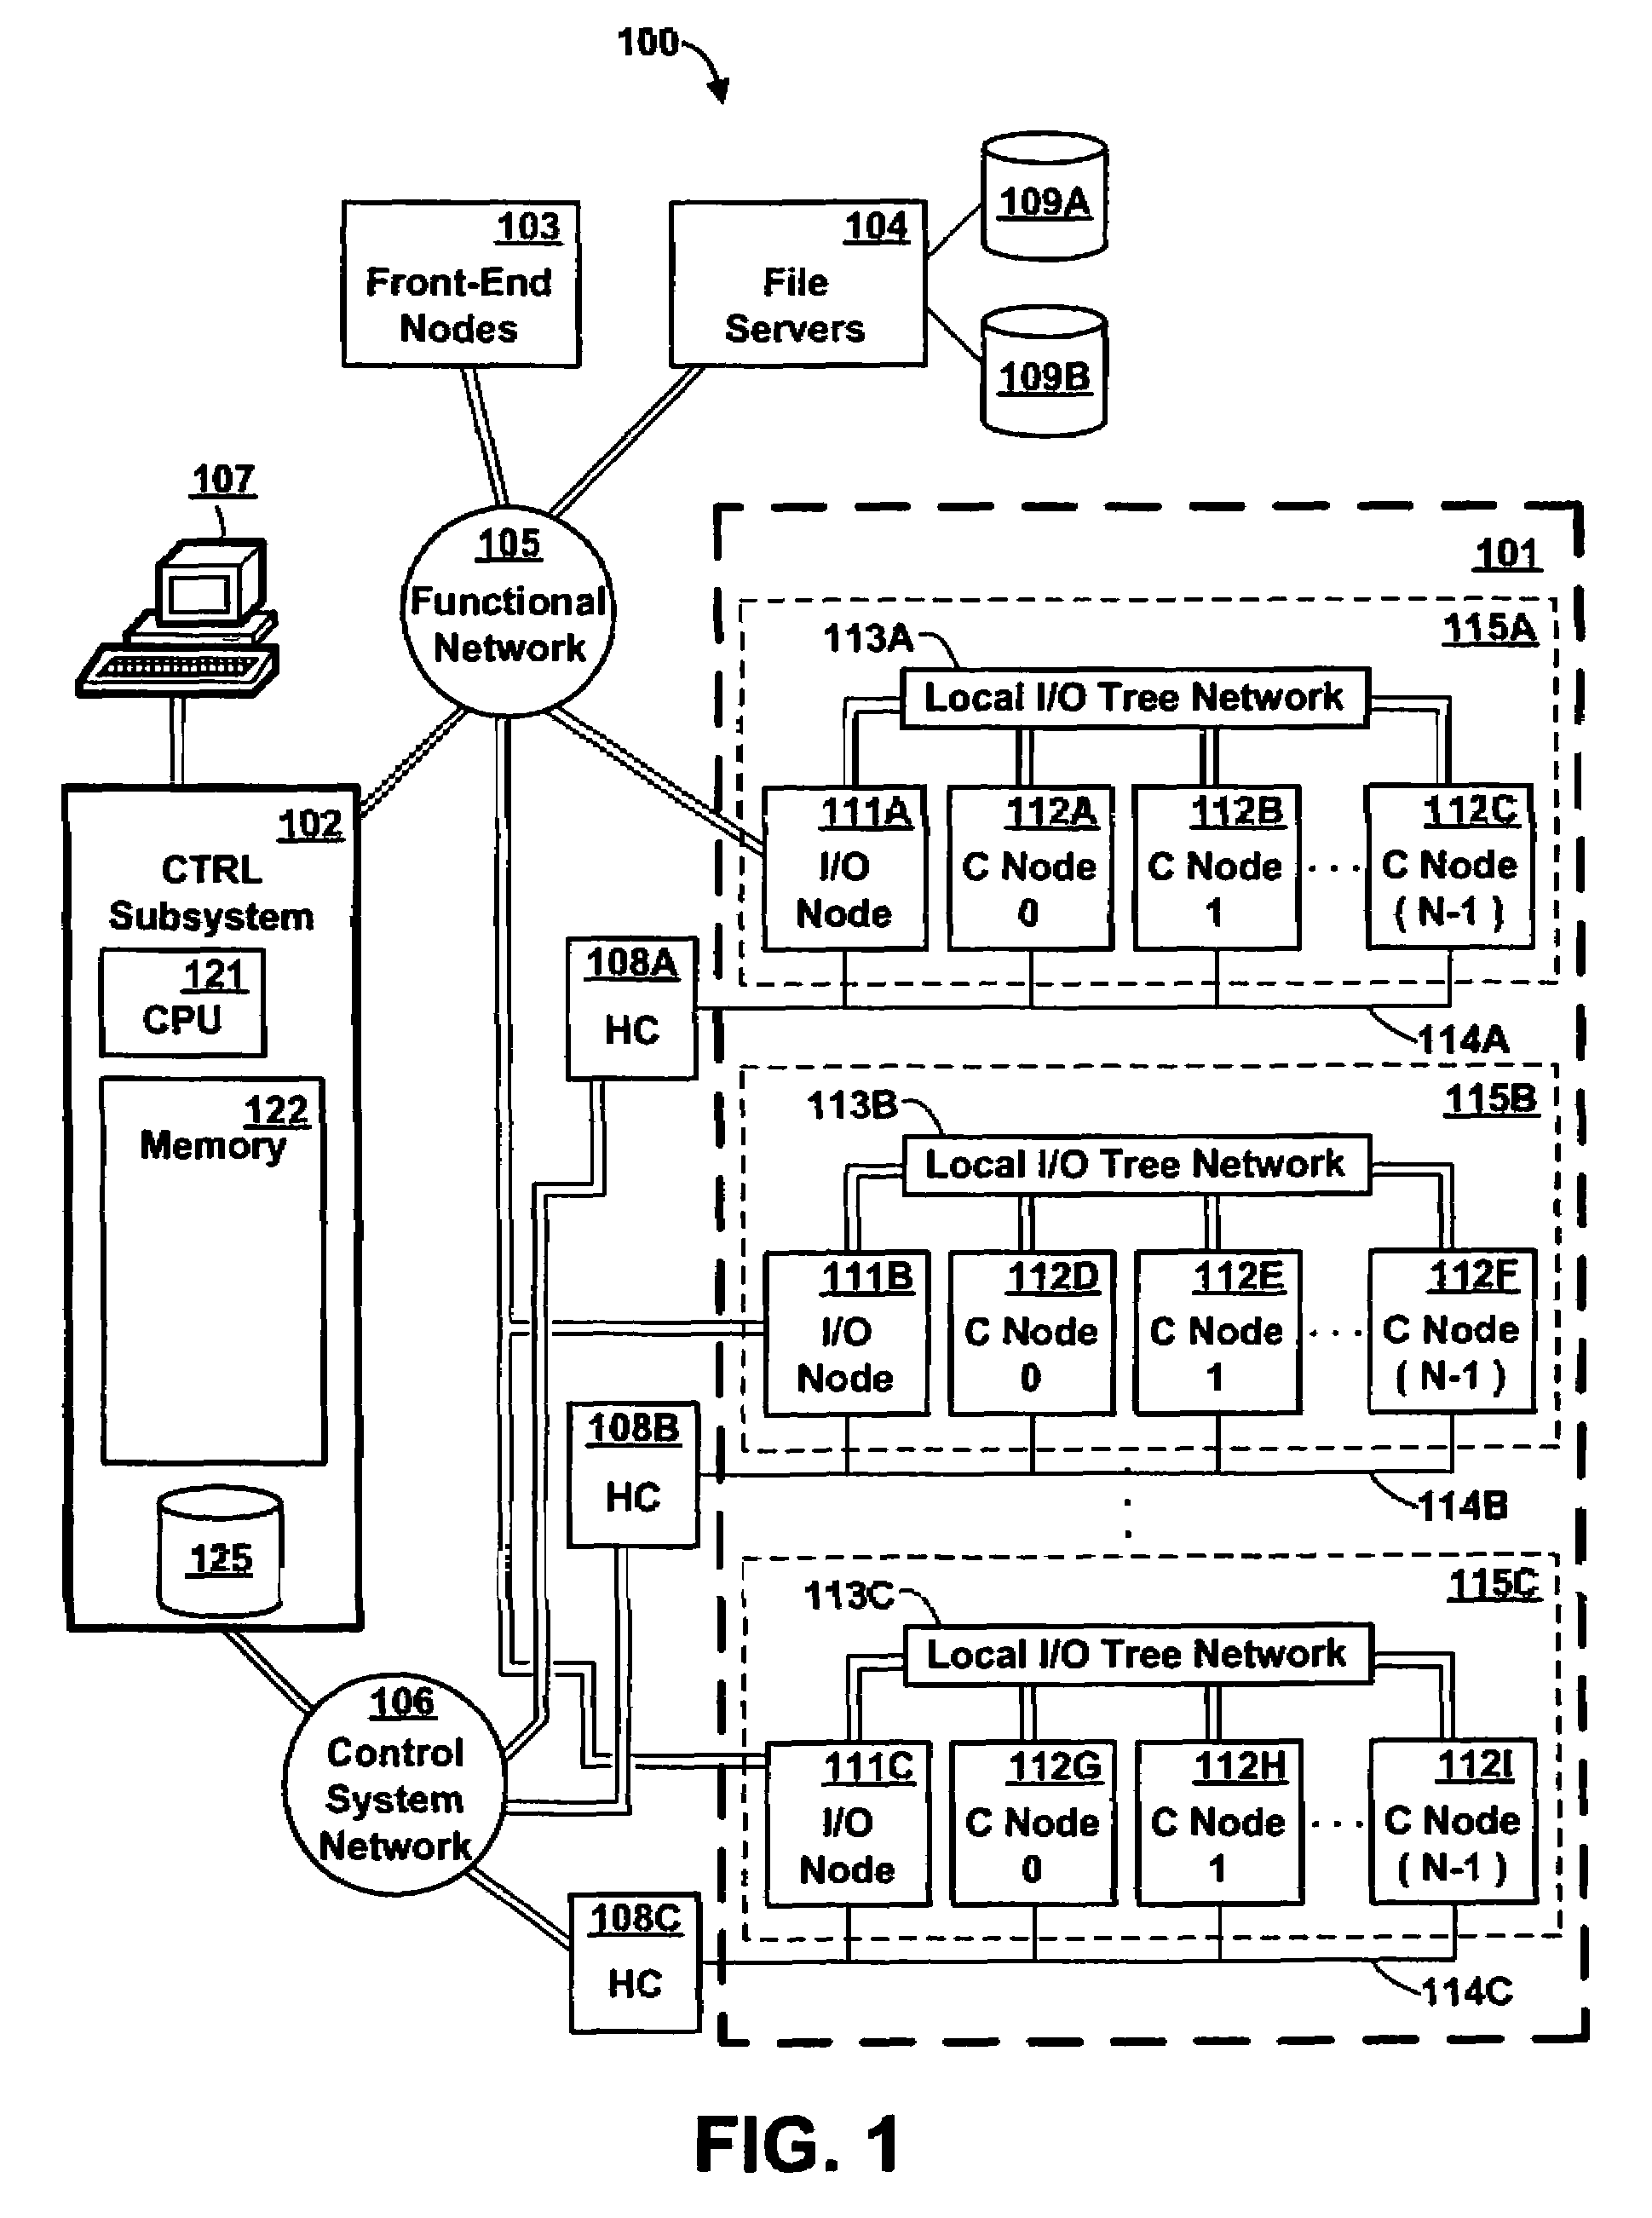 Memory request / grant daemons in virtual nodes for moving subdivided local memory space from VN to VN in nodes of a massively parallel computer system